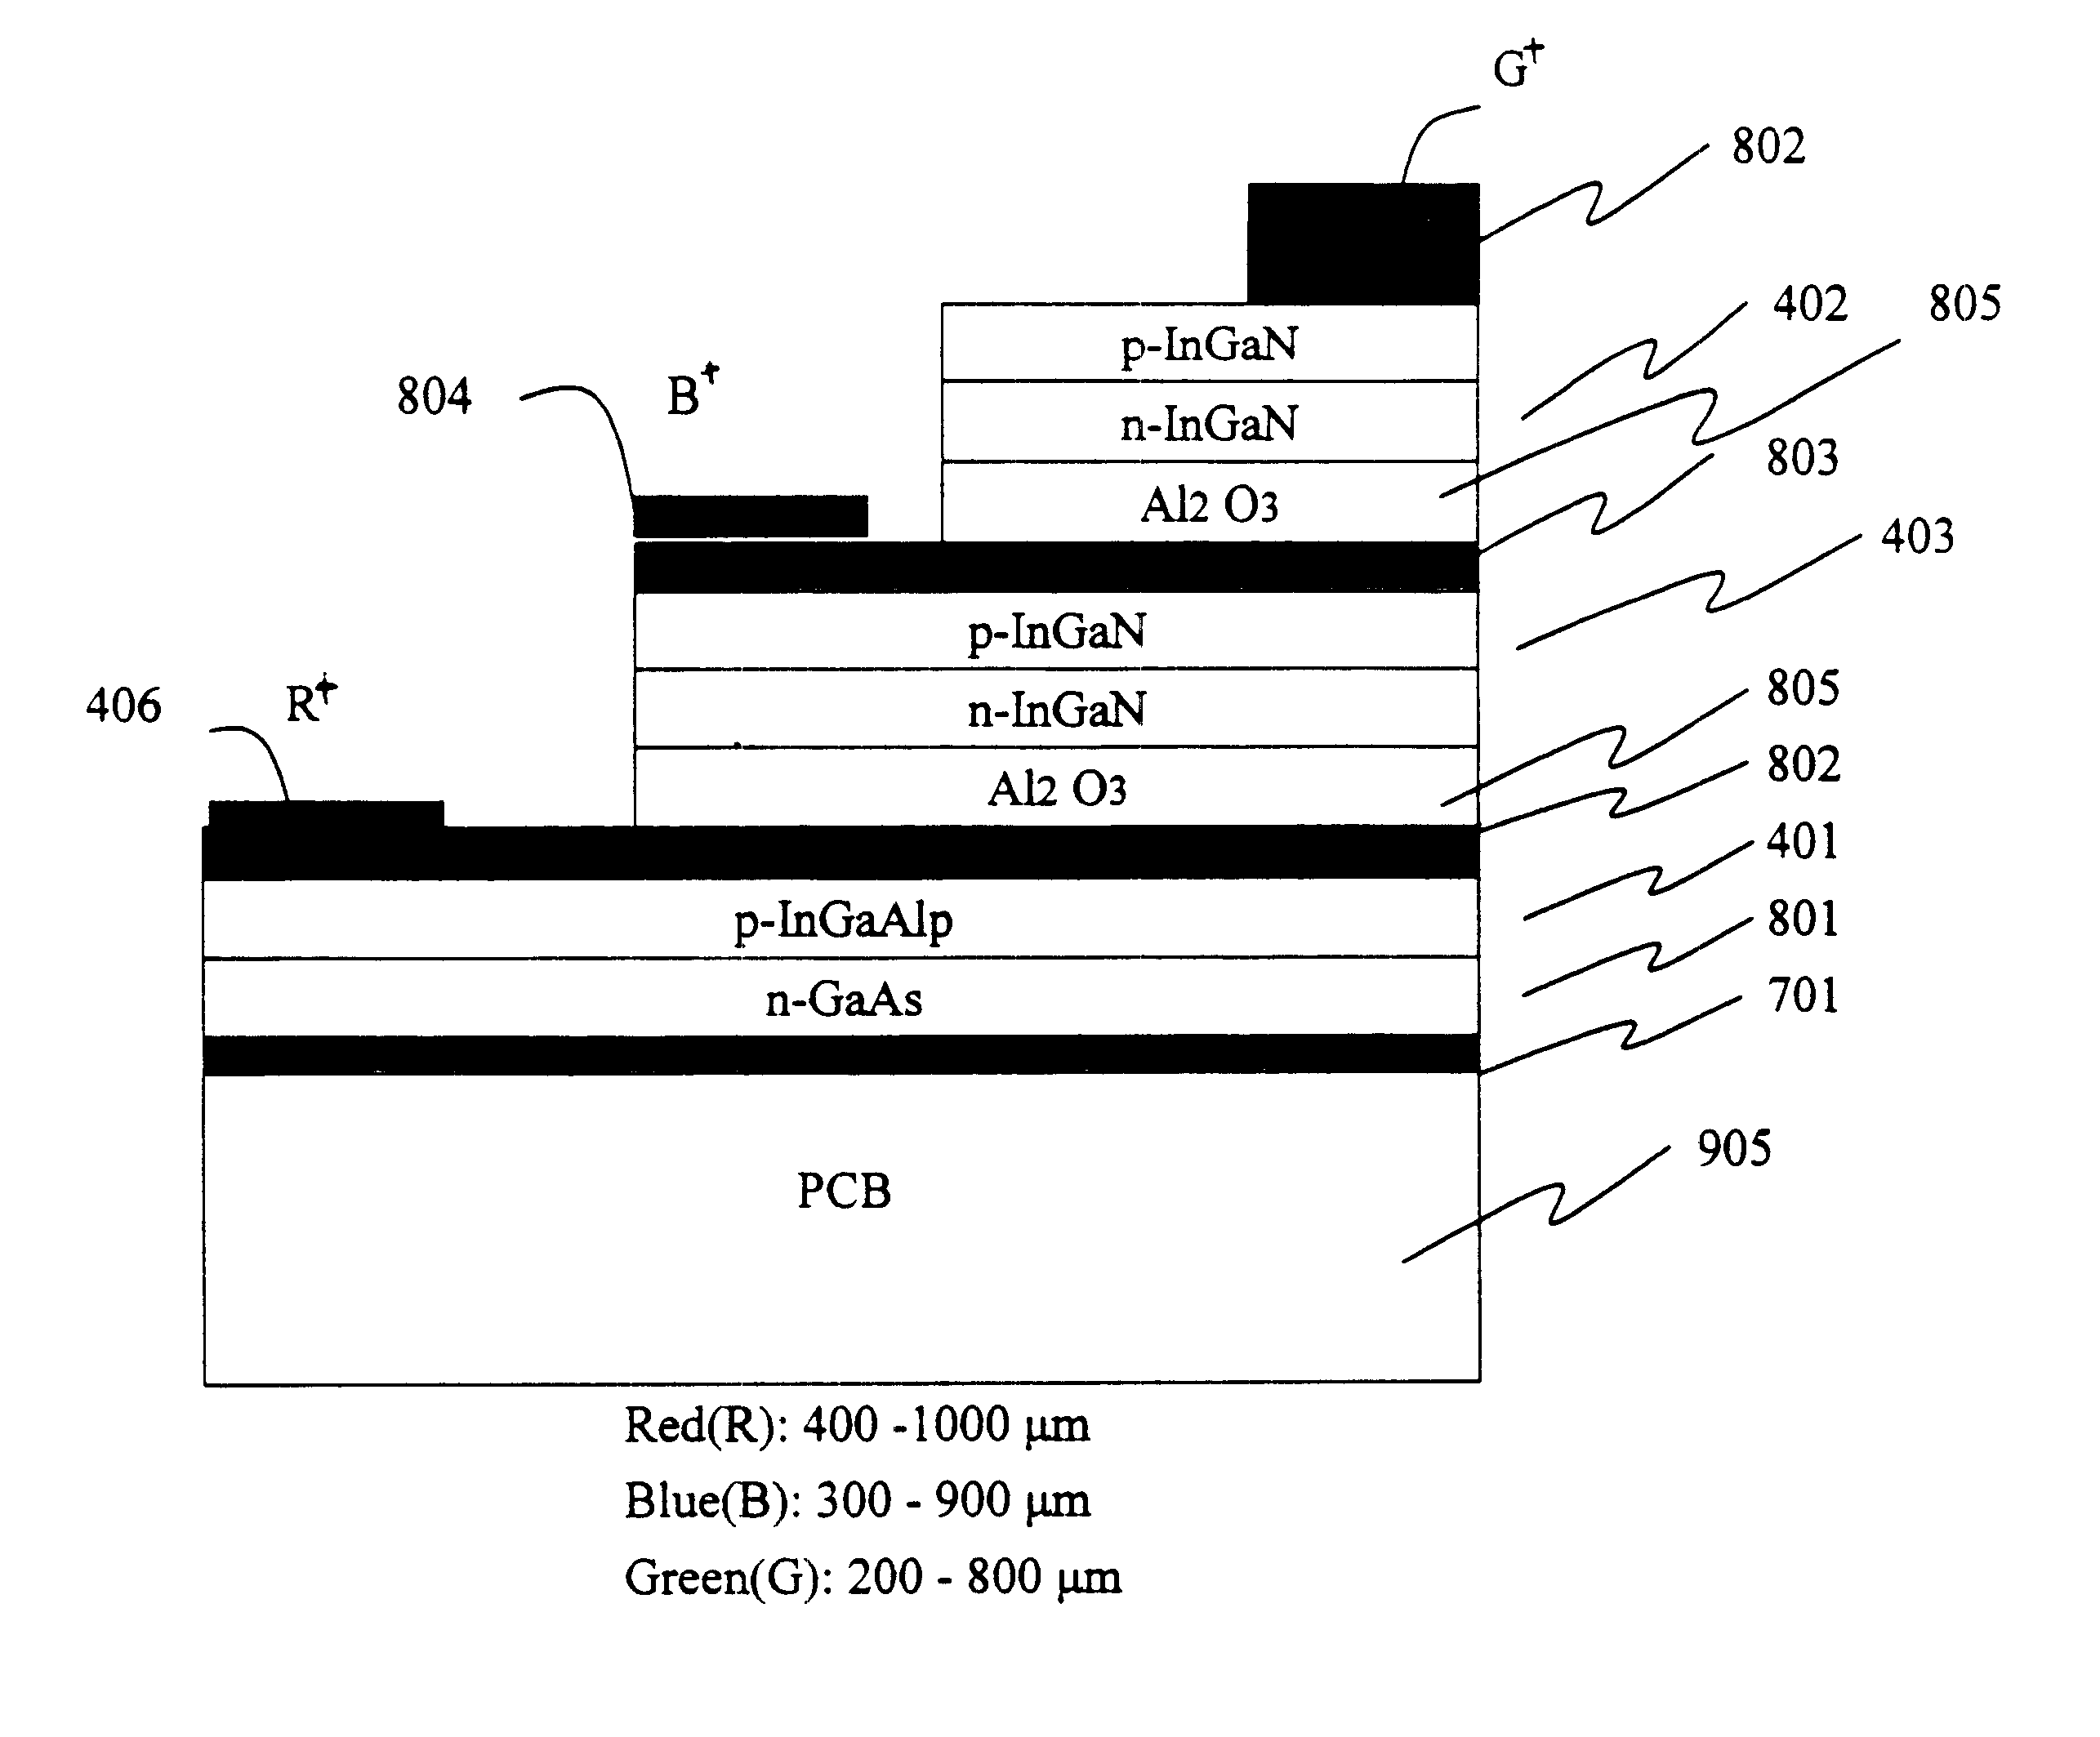 Package structure of full color LED form by overlap cascaded die bonding